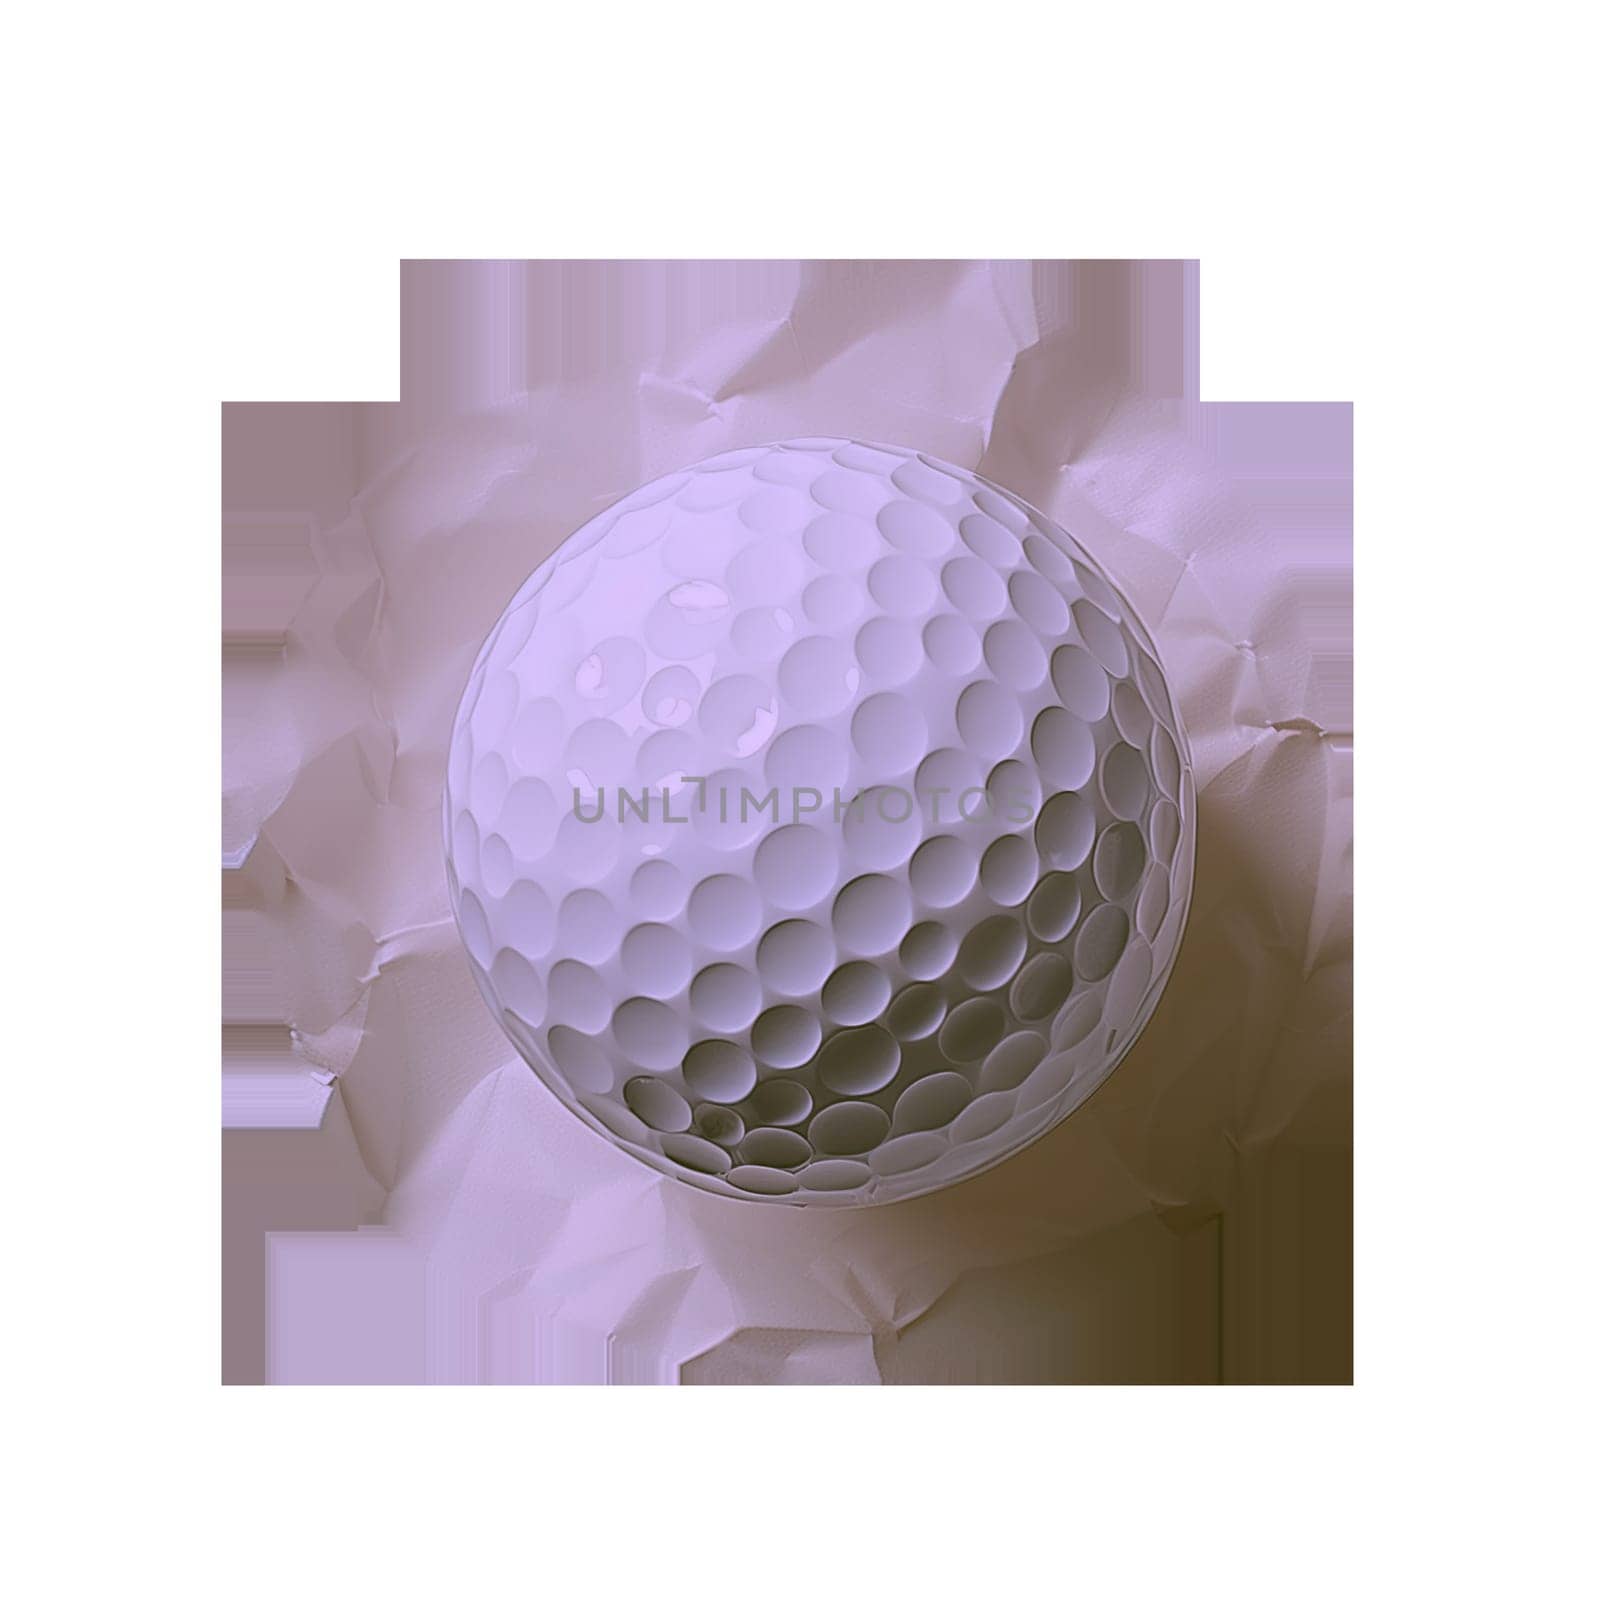 Golf ball on crumpled paper cut out image by Dustick